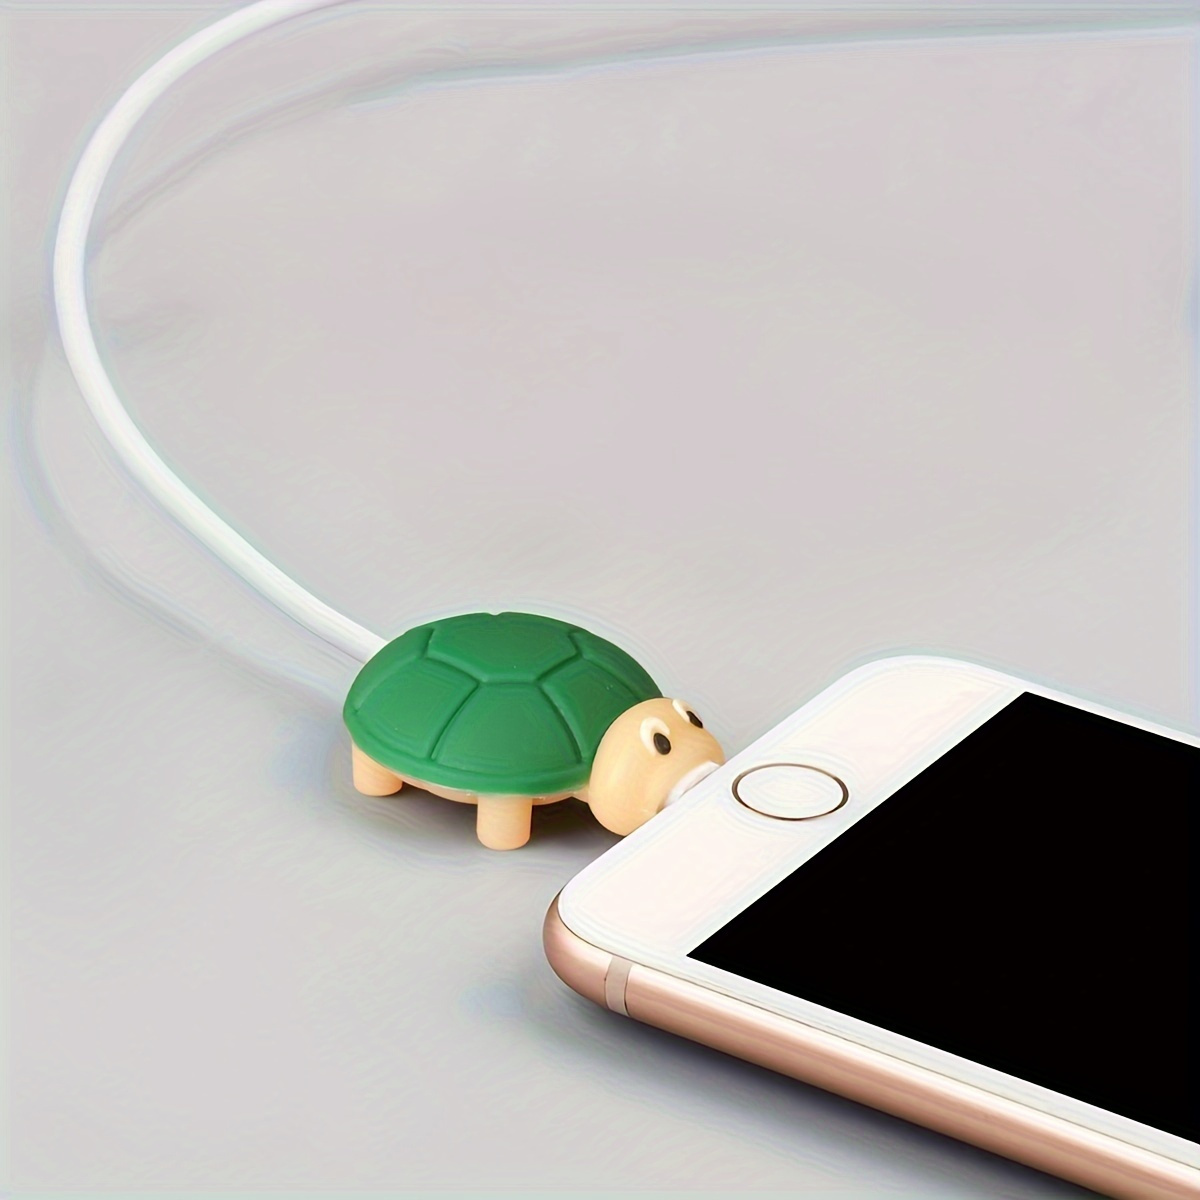 Fruit Cartoon Cable Protector Cute Charger Protector Cable Winder Organizer  Cable Bite Data Line Protective Cover For iPhone